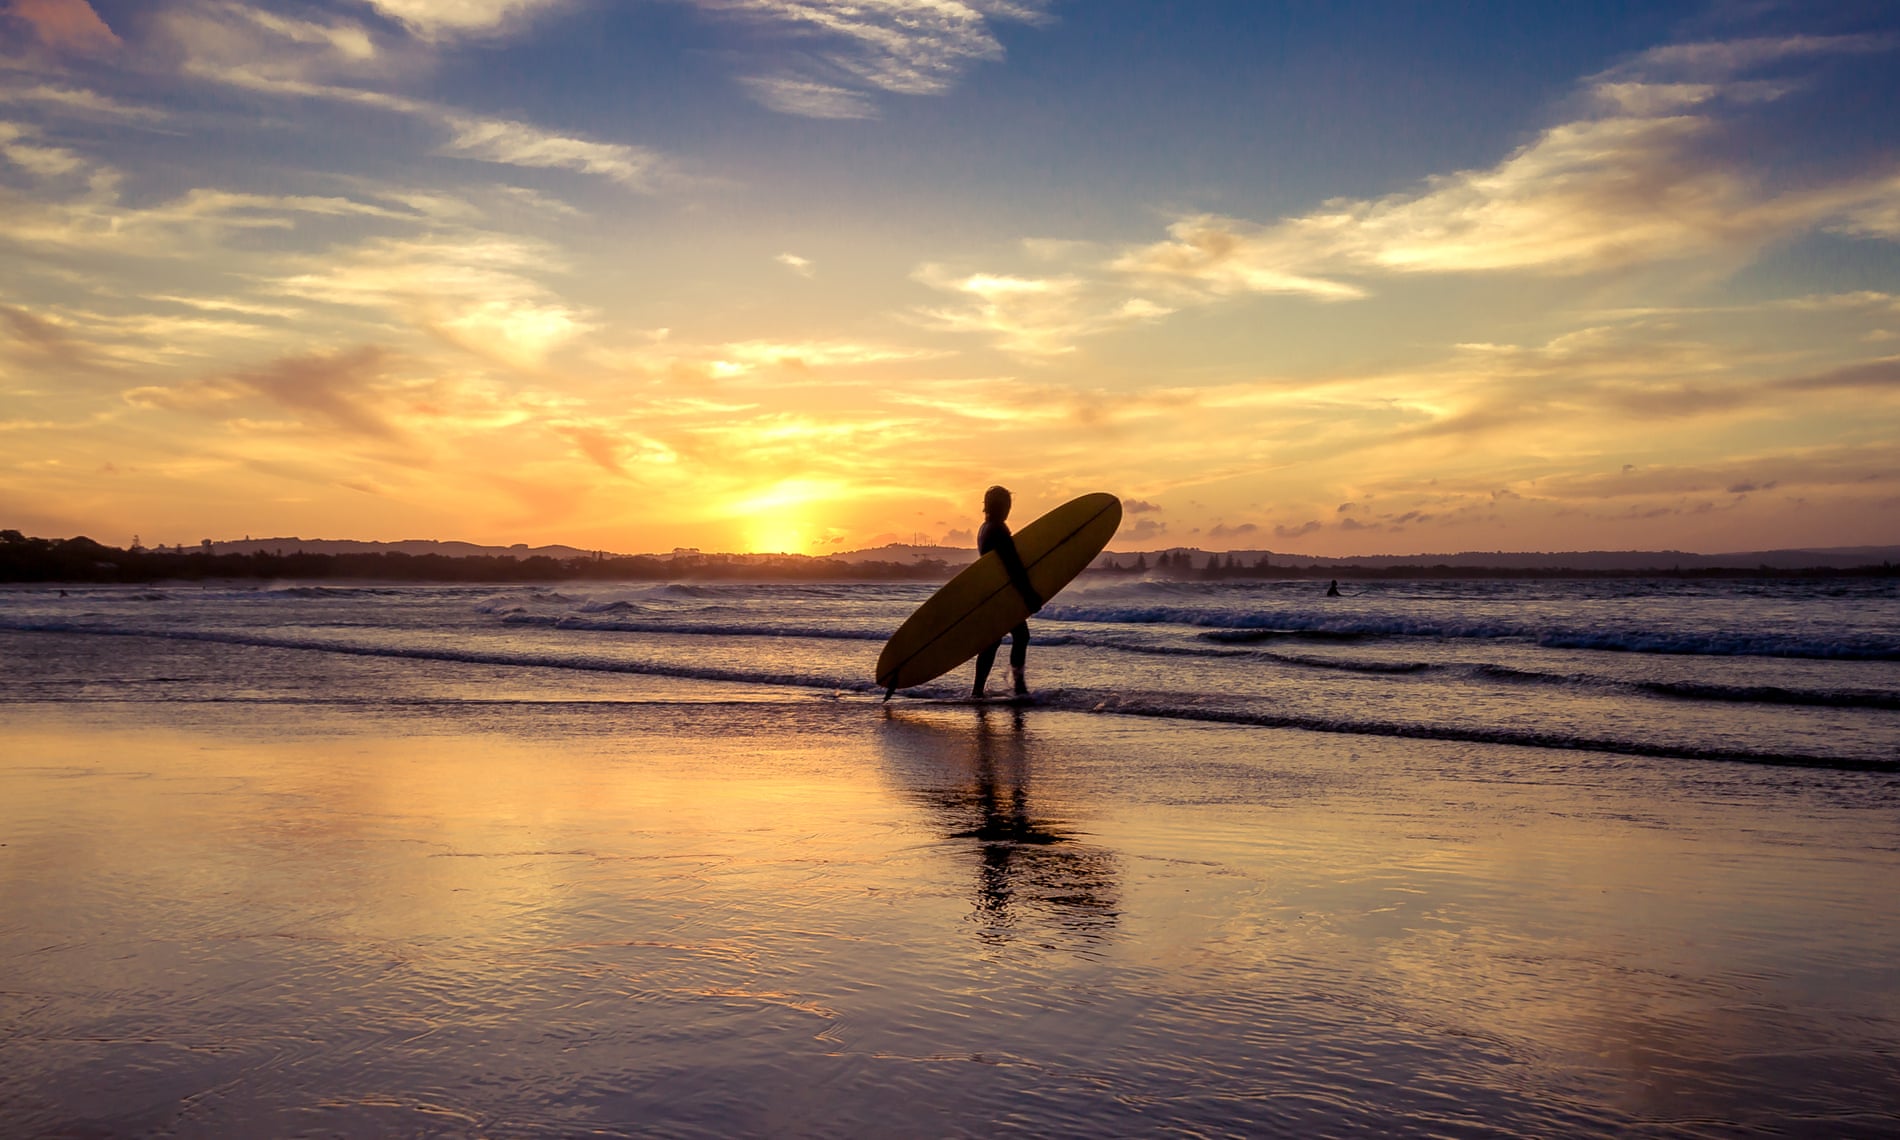 A person with a surfboard at sunset